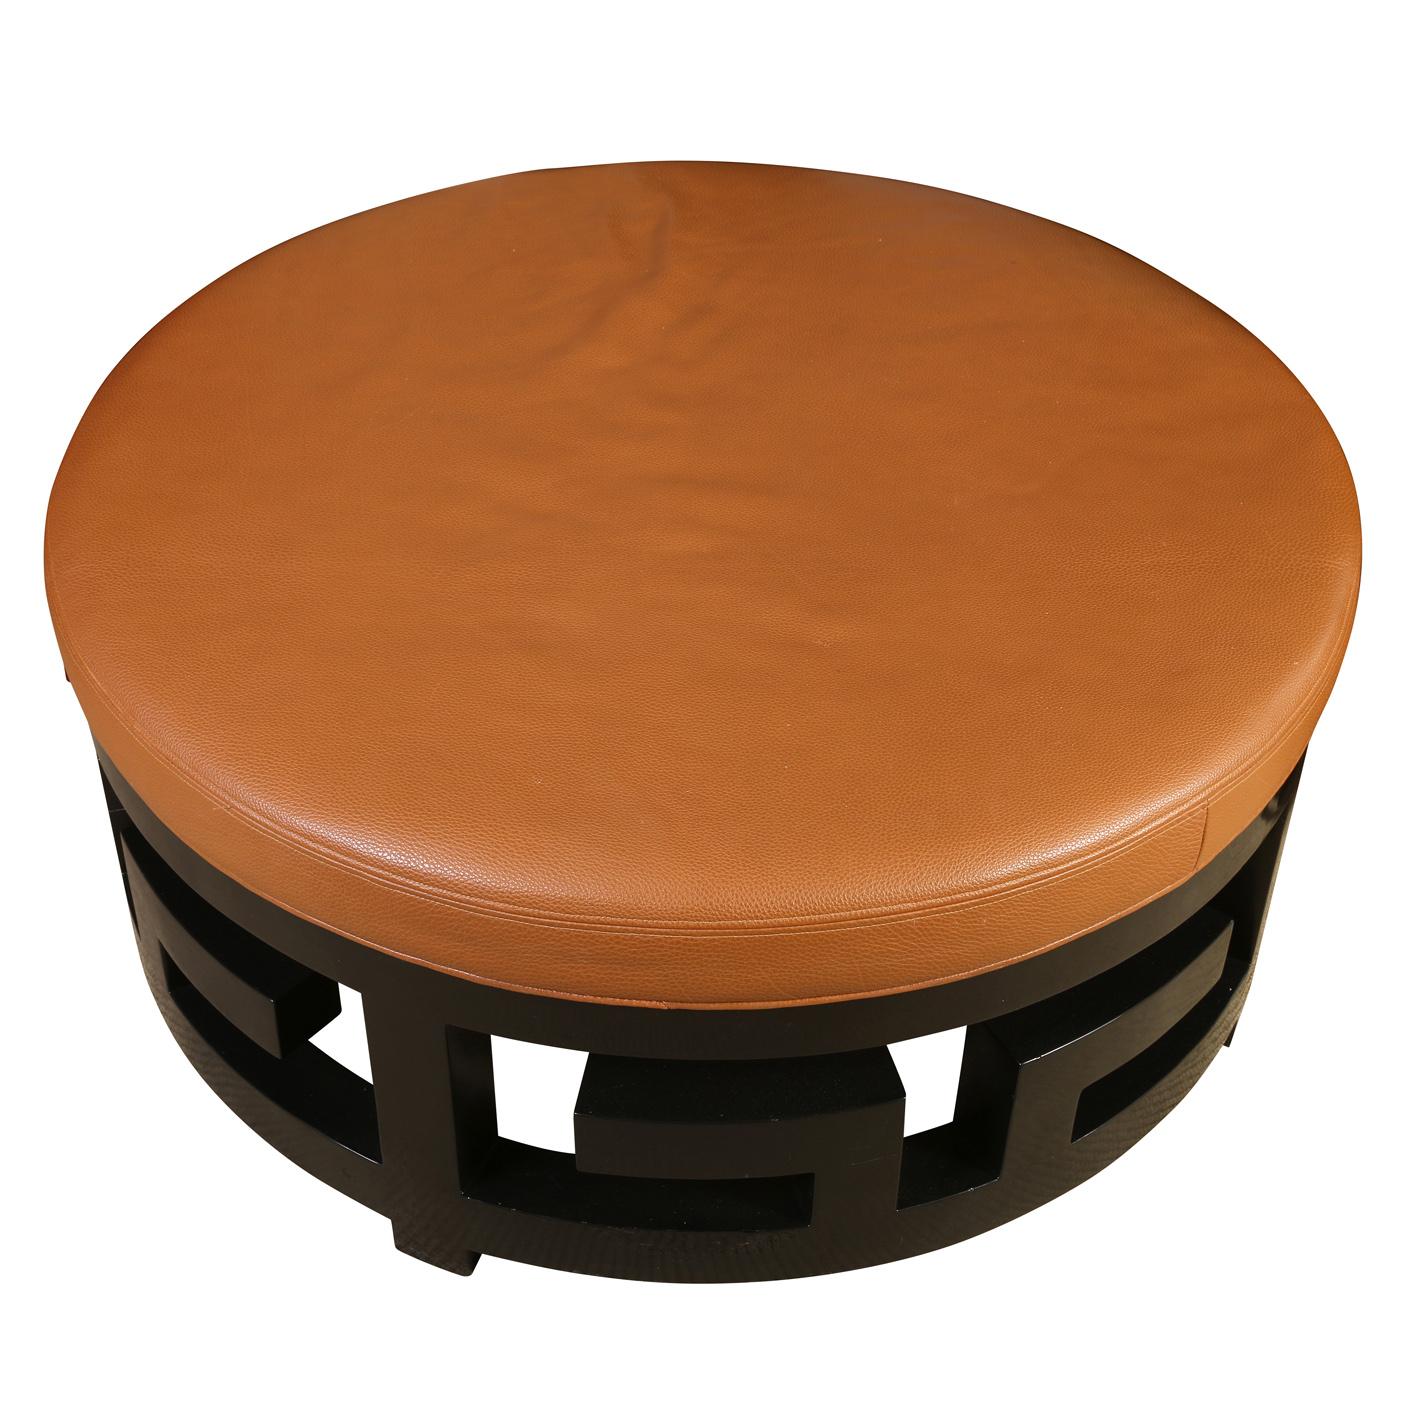 20th Century Round Pebbled Leather Ottoman with Black Fretwork Base For Sale